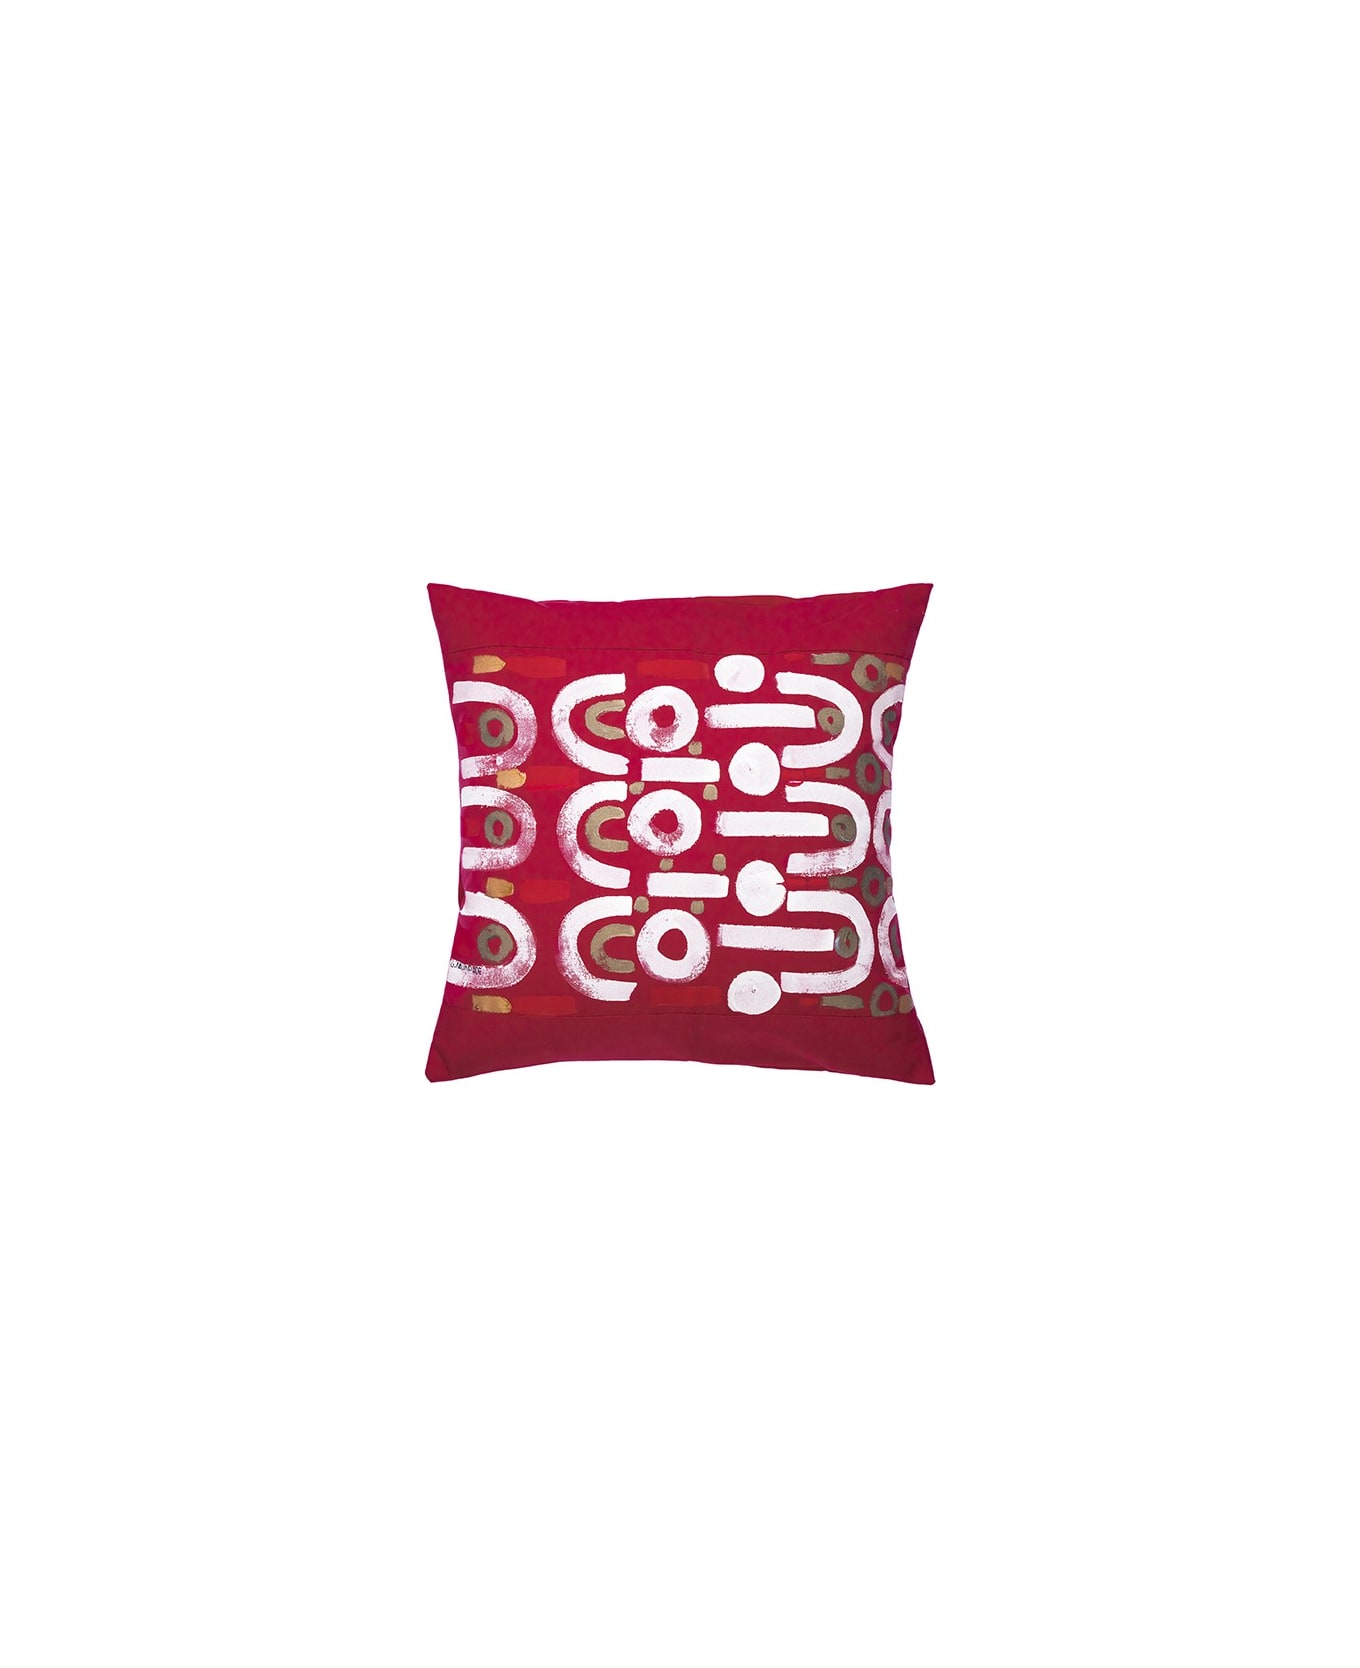 Le Botteghe su Gologone Acrylic Hand Painted Outdoor Cushion 60x60 cm - Dark Red